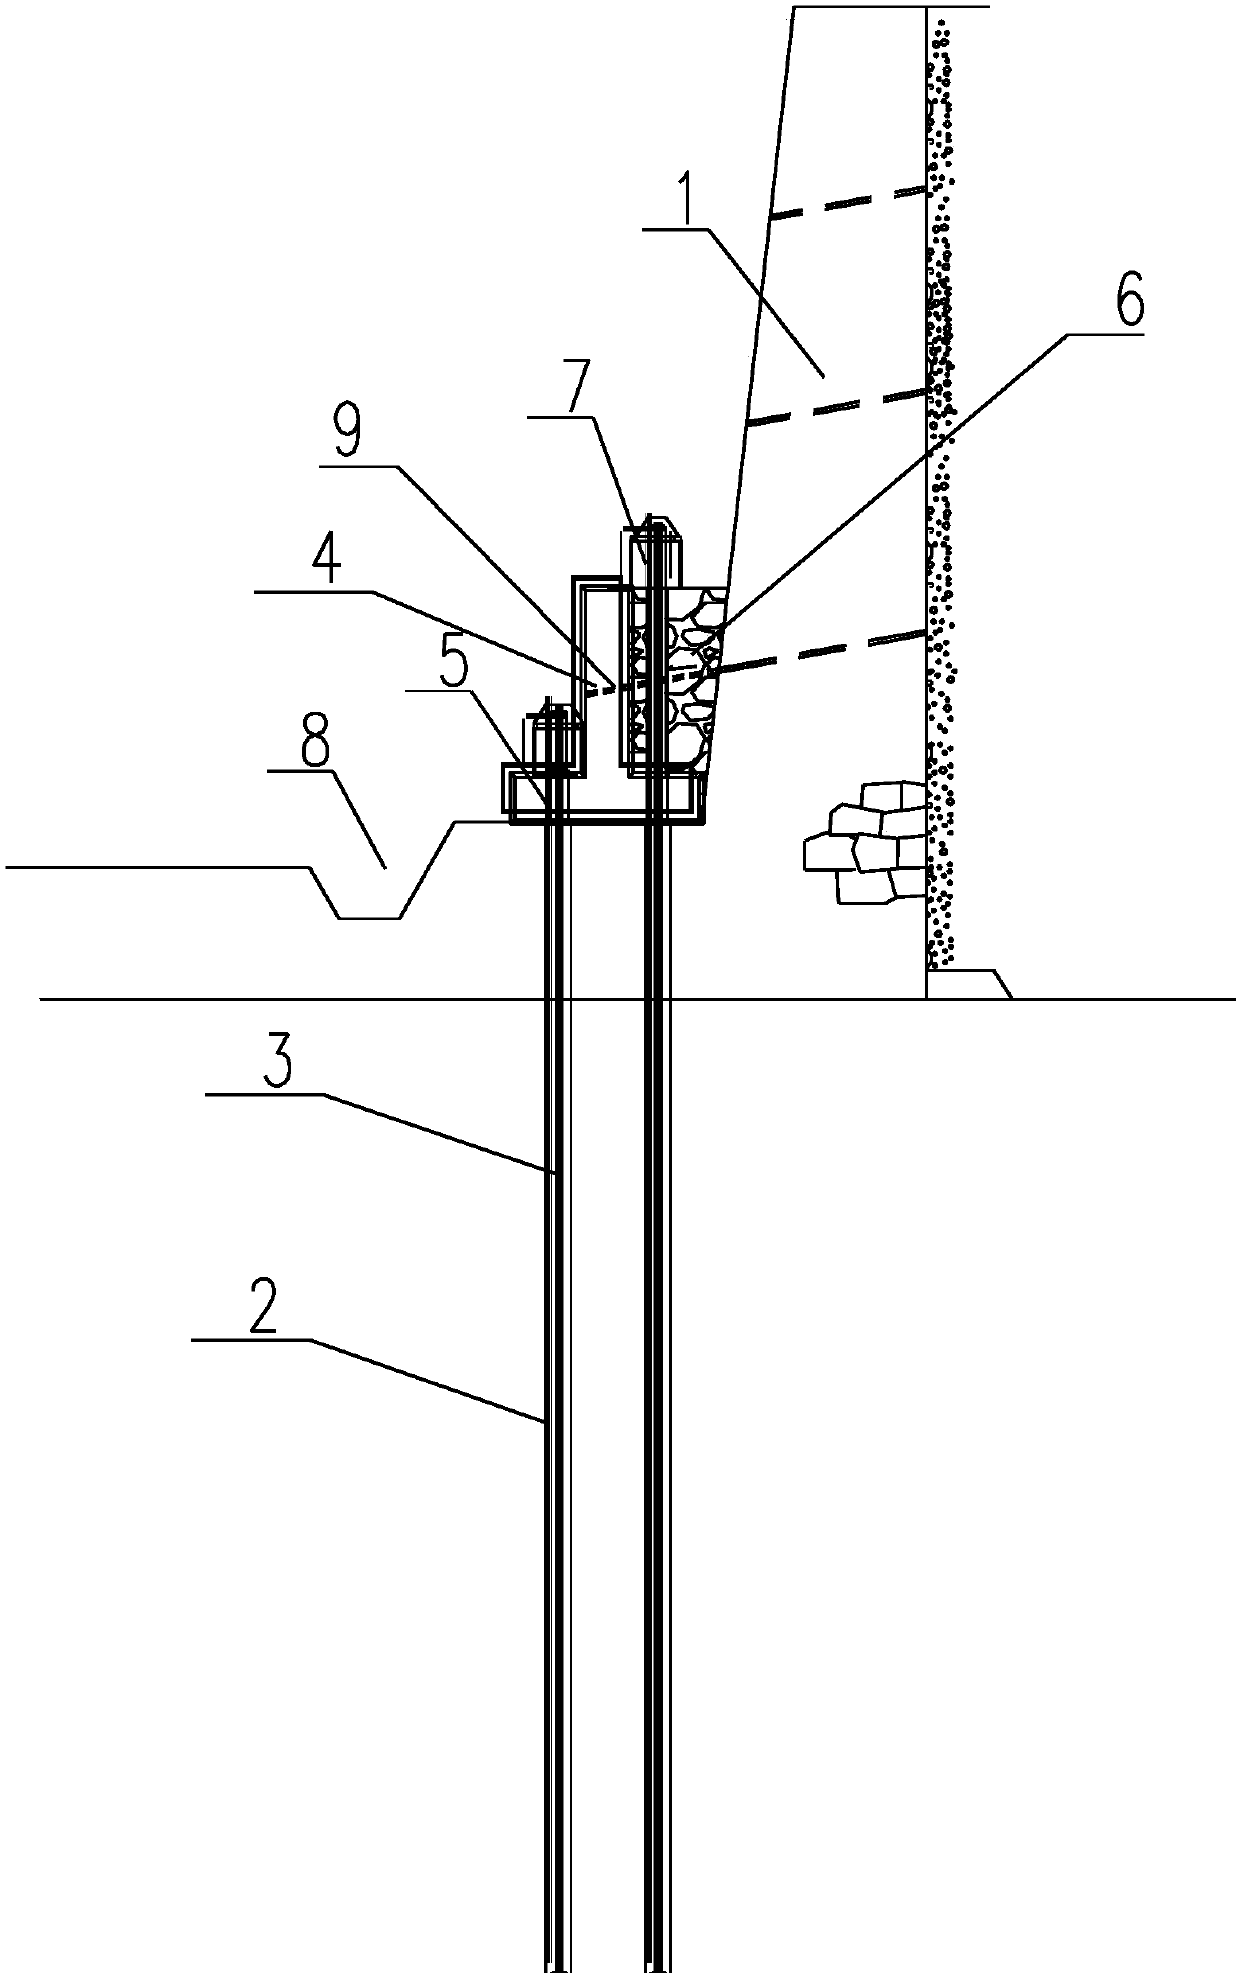 Method for reinforcing gravity type retaining wall